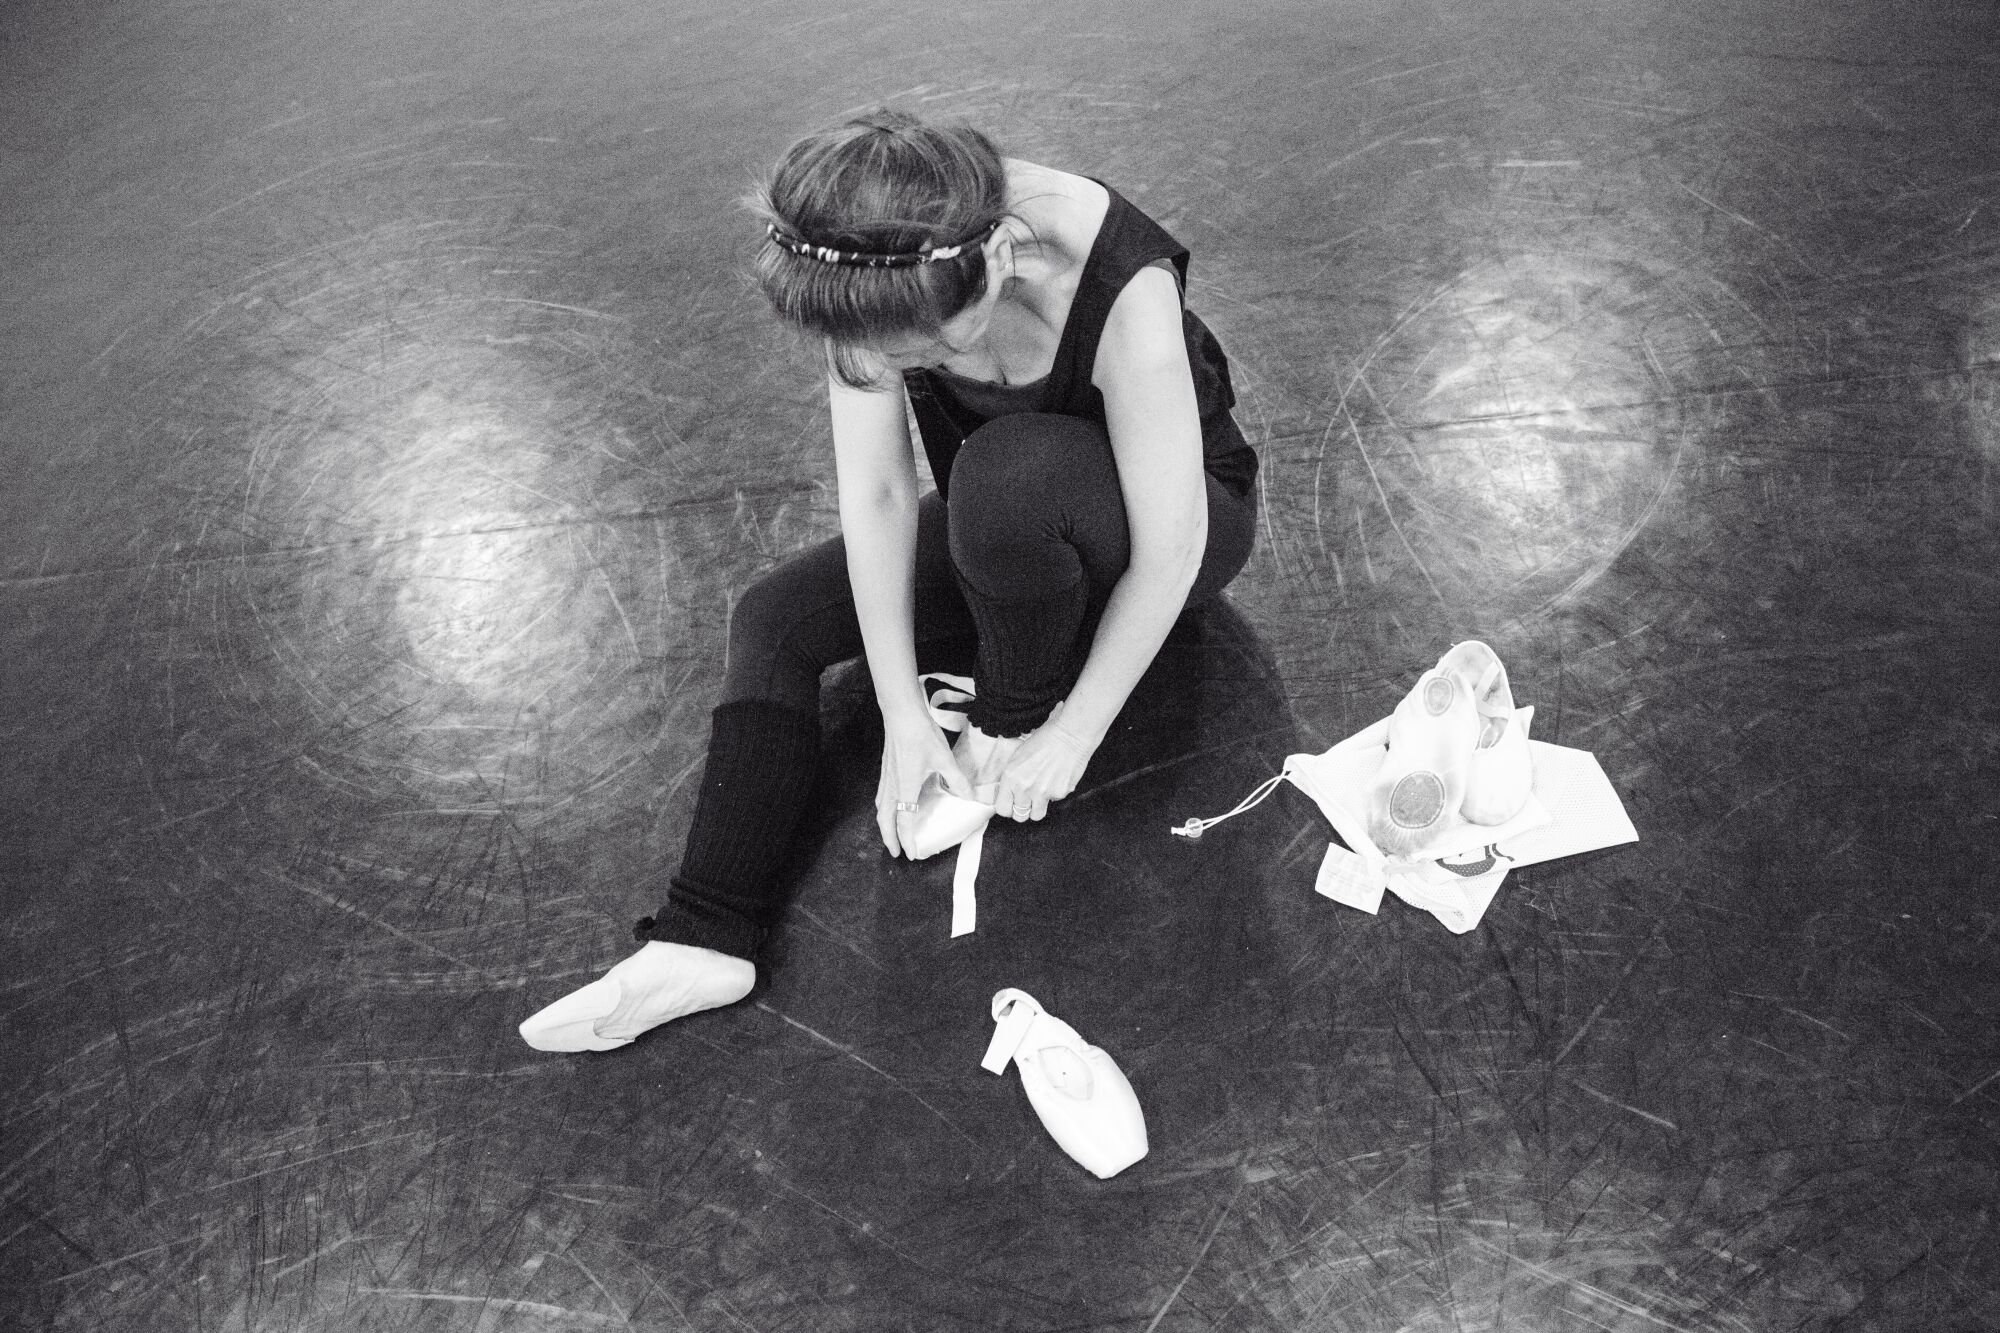 A dancer tying ballet shoes in the studio.